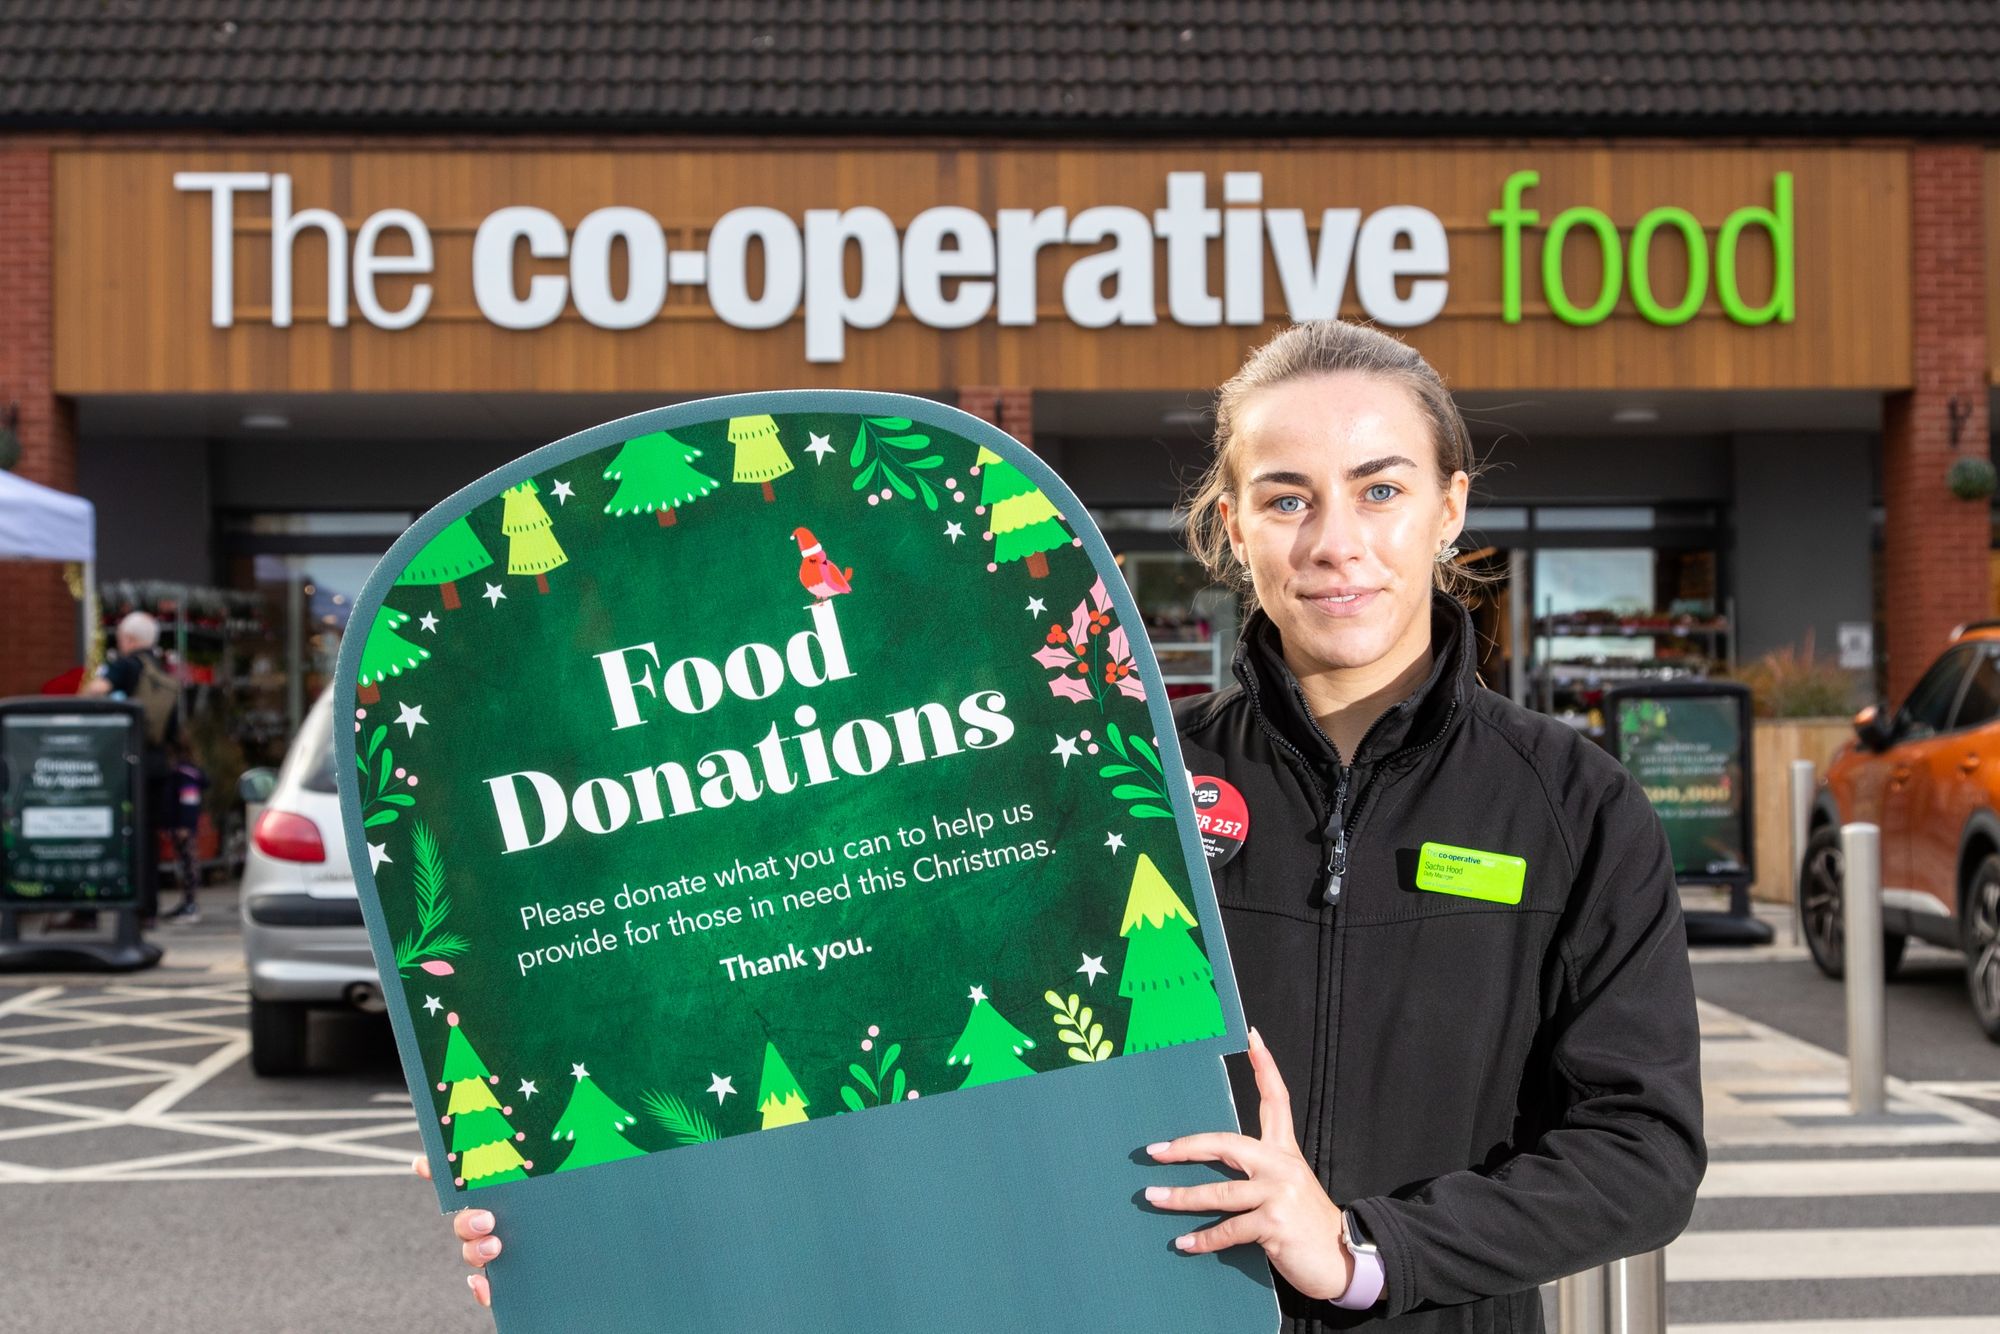 Shoppers donate enough food to create over 25,000 meals for people in need following Christmas appeal